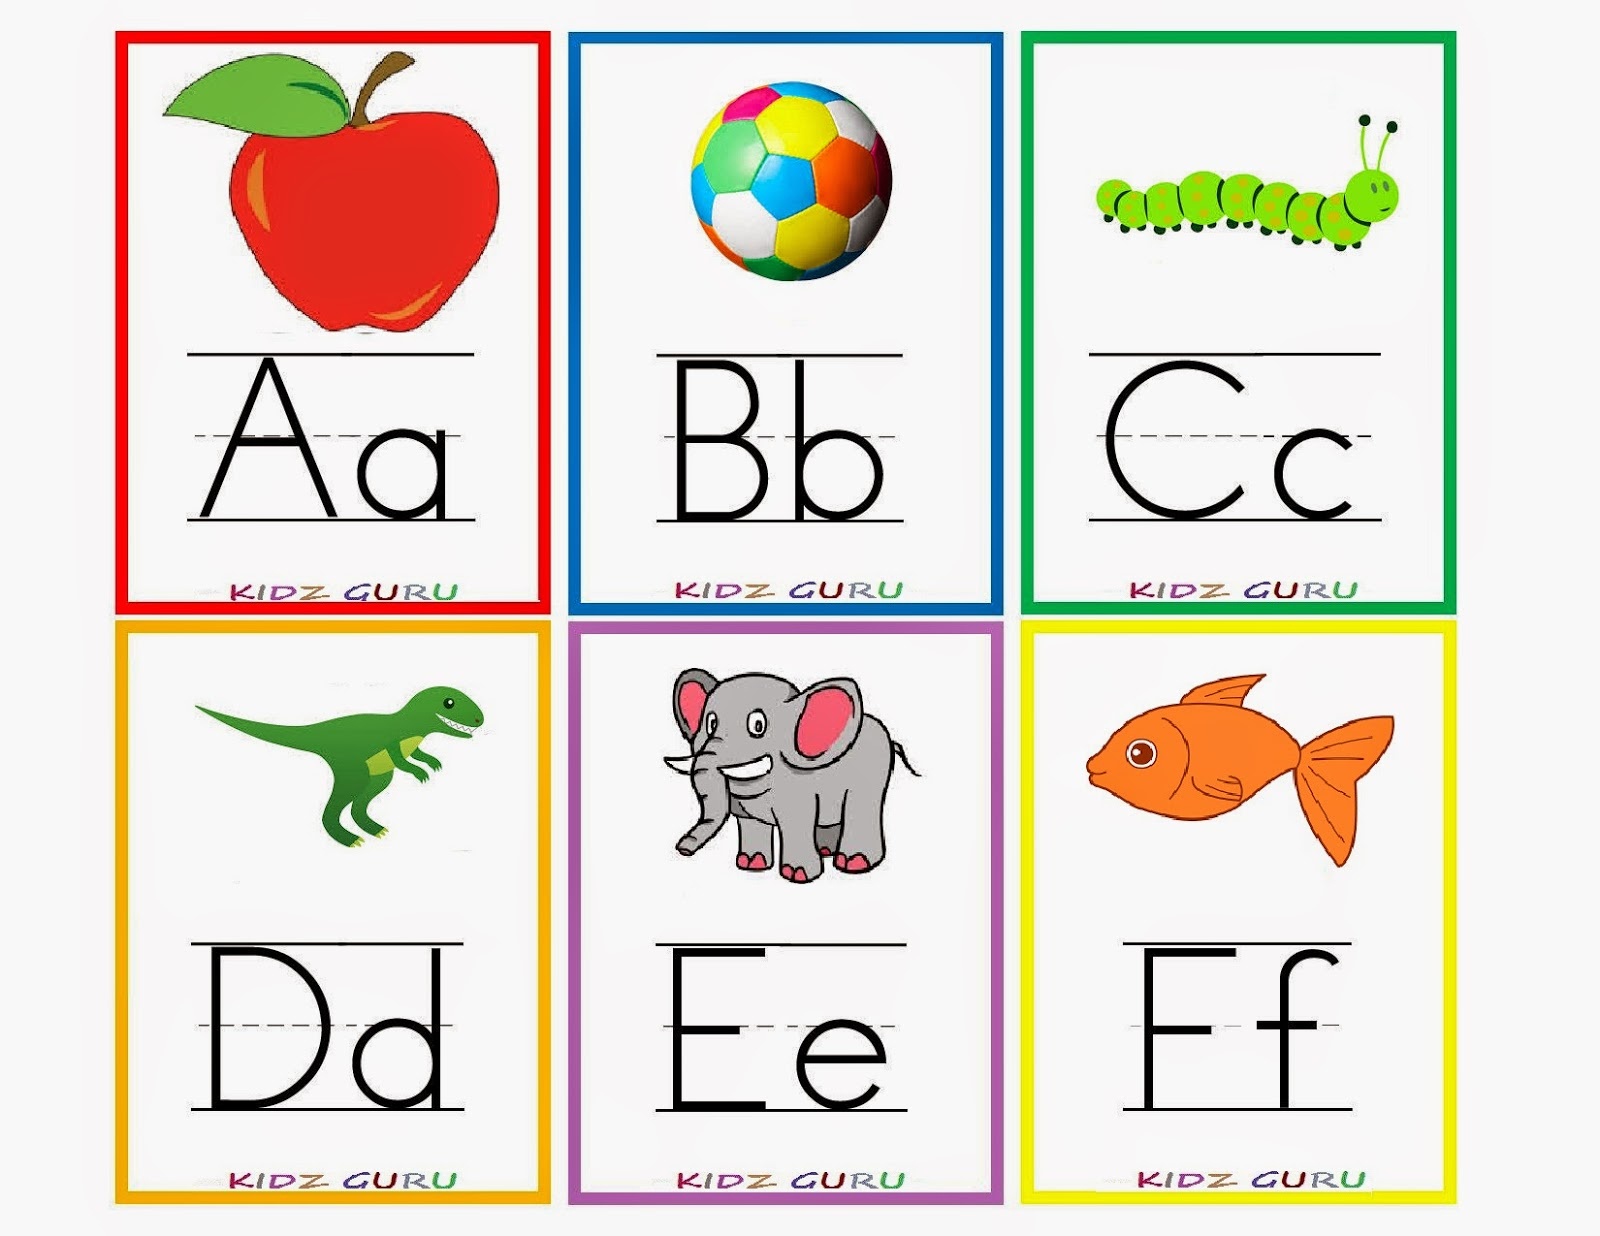 Kindergarten Worksheets: Printable Worksheets - Alphabet Flash Cards 1 - Free Printable Abc Flashcards With Pictures